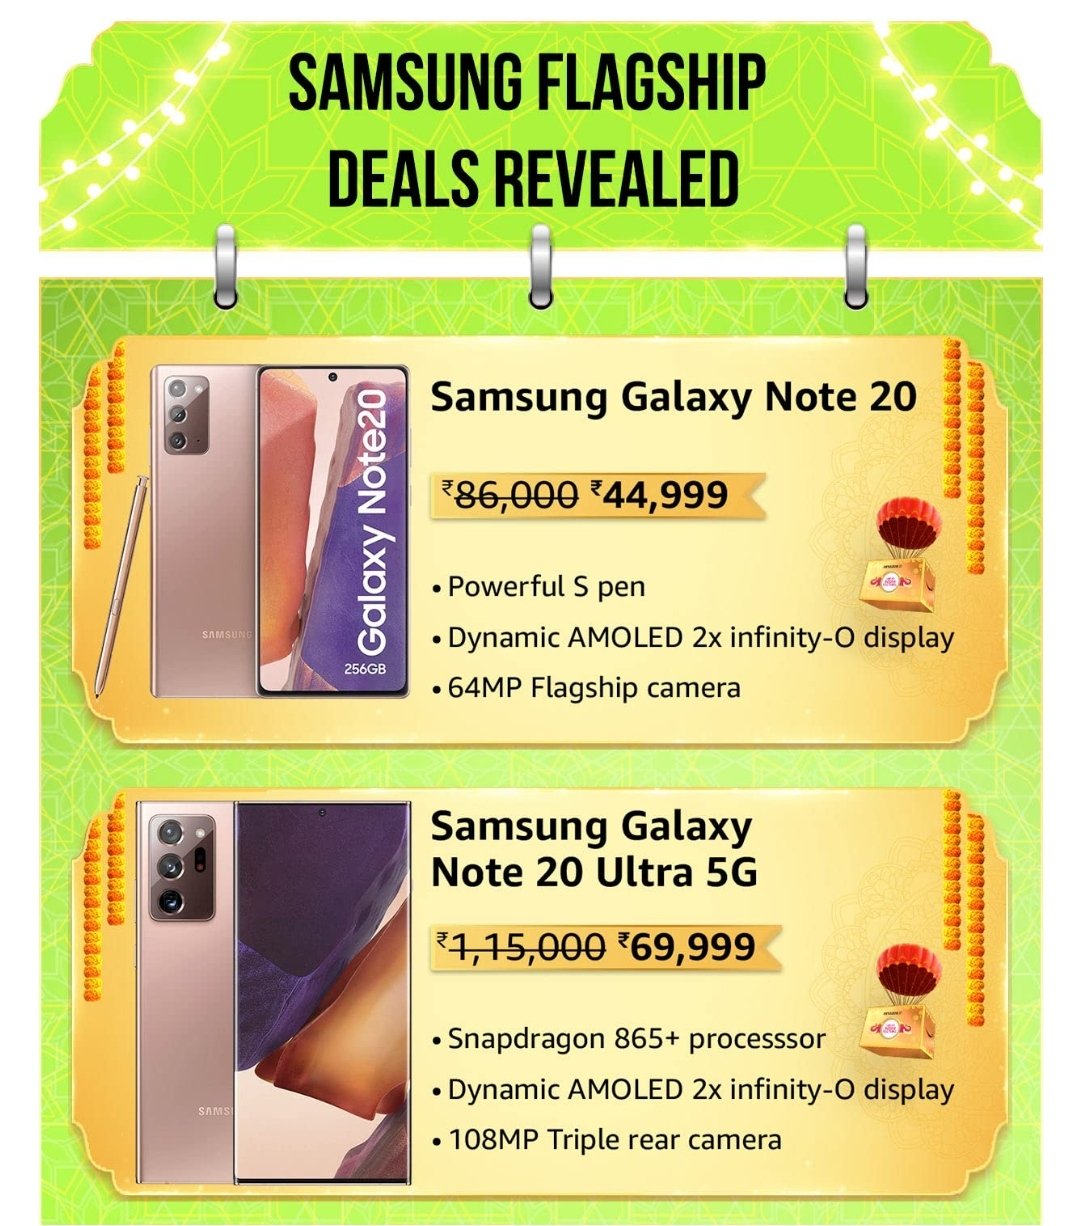 Amazon India could have a killer Galaxy Note 20 Ultra deal next month ...